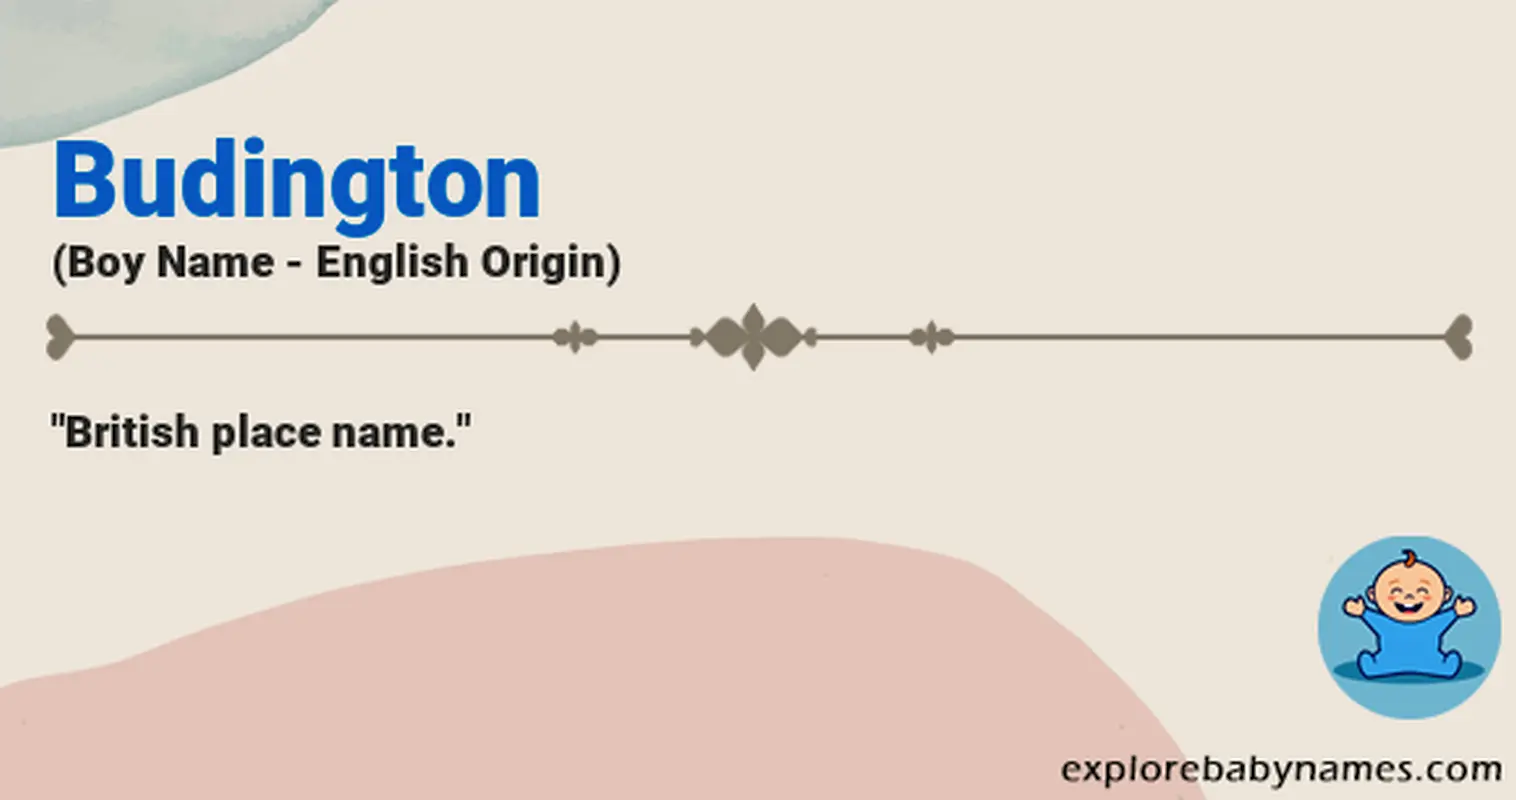 Meaning of Budington